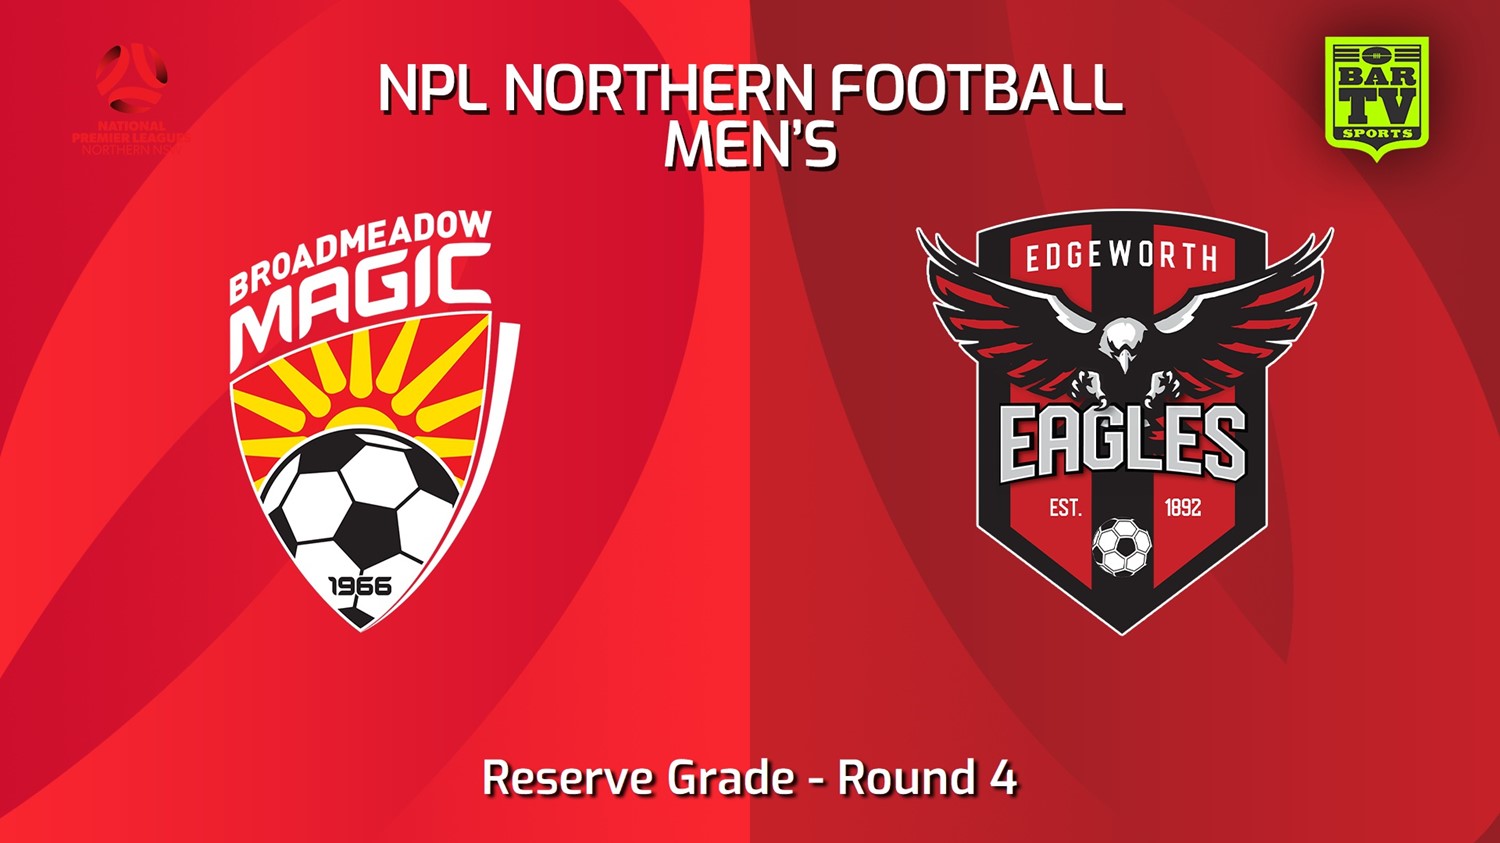 240317-NNSW NPLM Res Round 4 - Broadmeadow Magic Res v Edgeworth Eagles Res Minigame Slate Image